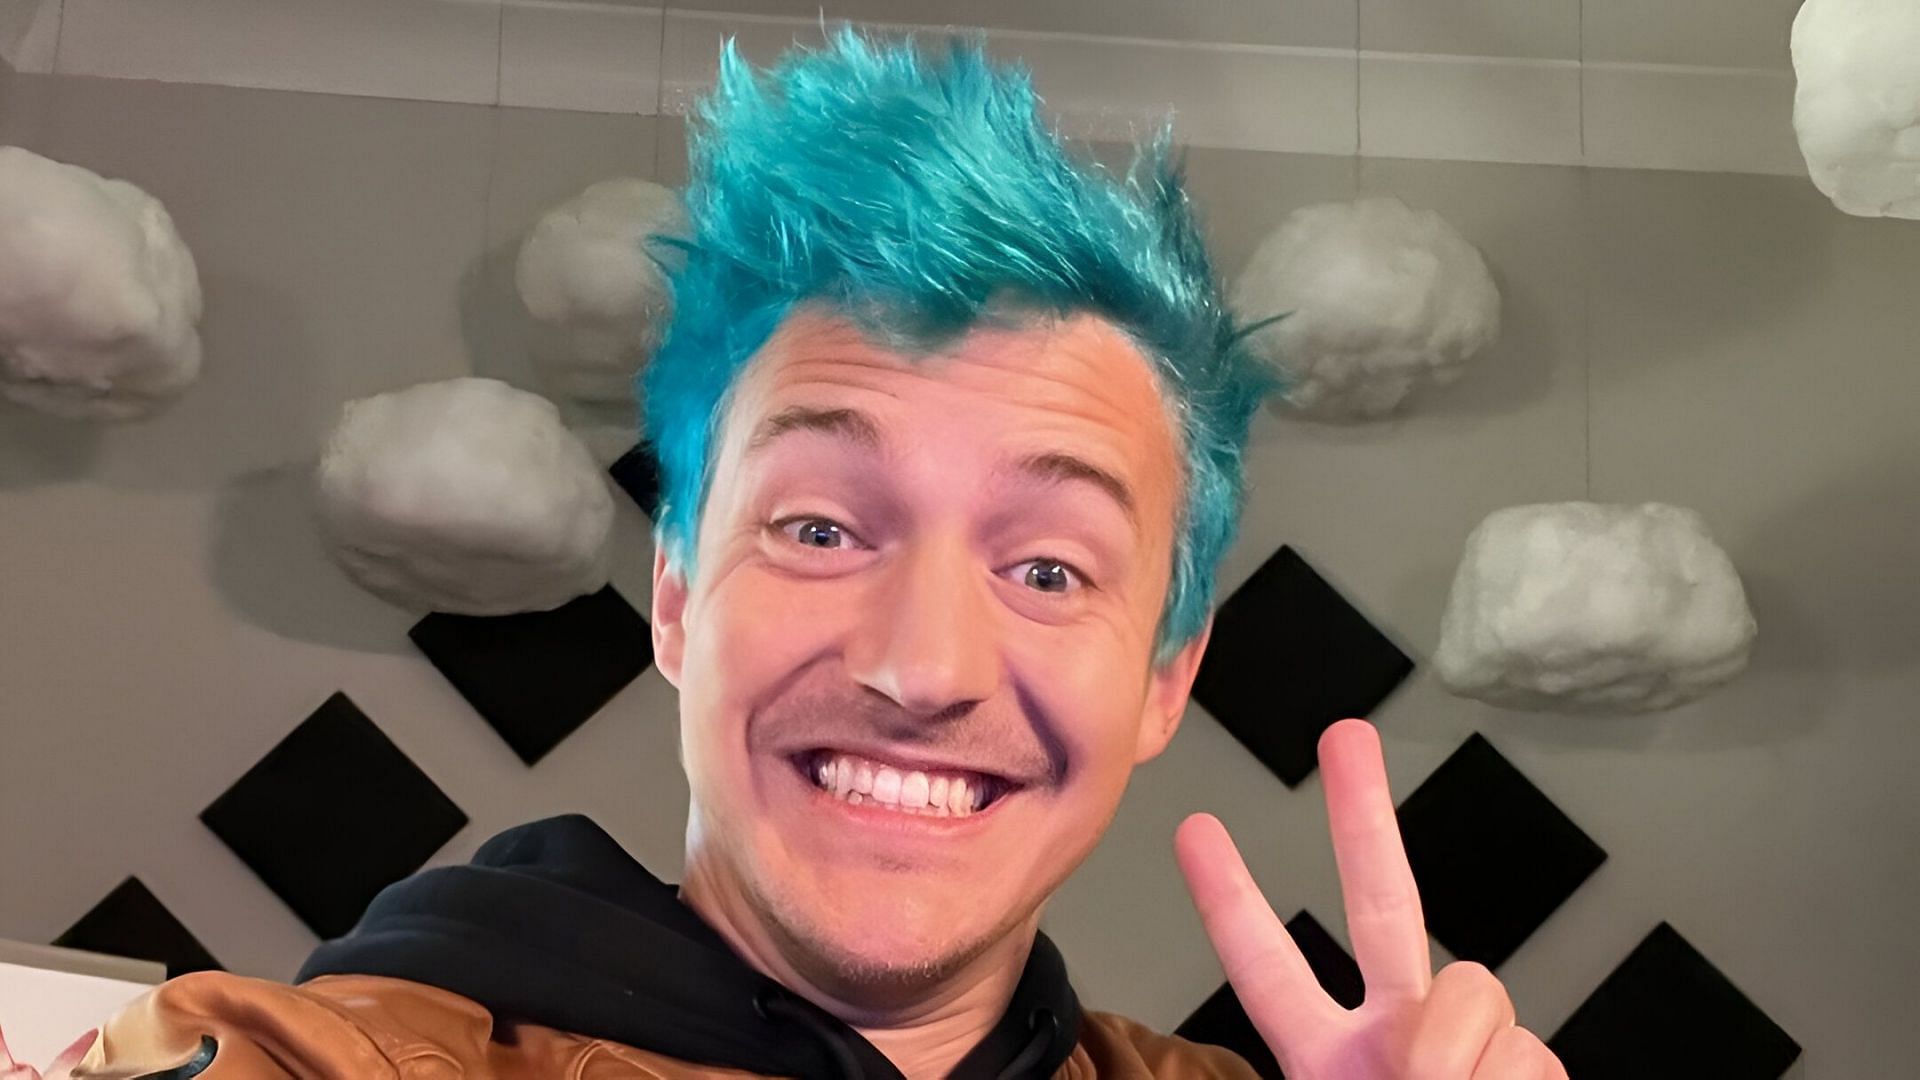 The streamer was diagnosed with cancer a week ago. (Image via Instagram/@ninja)